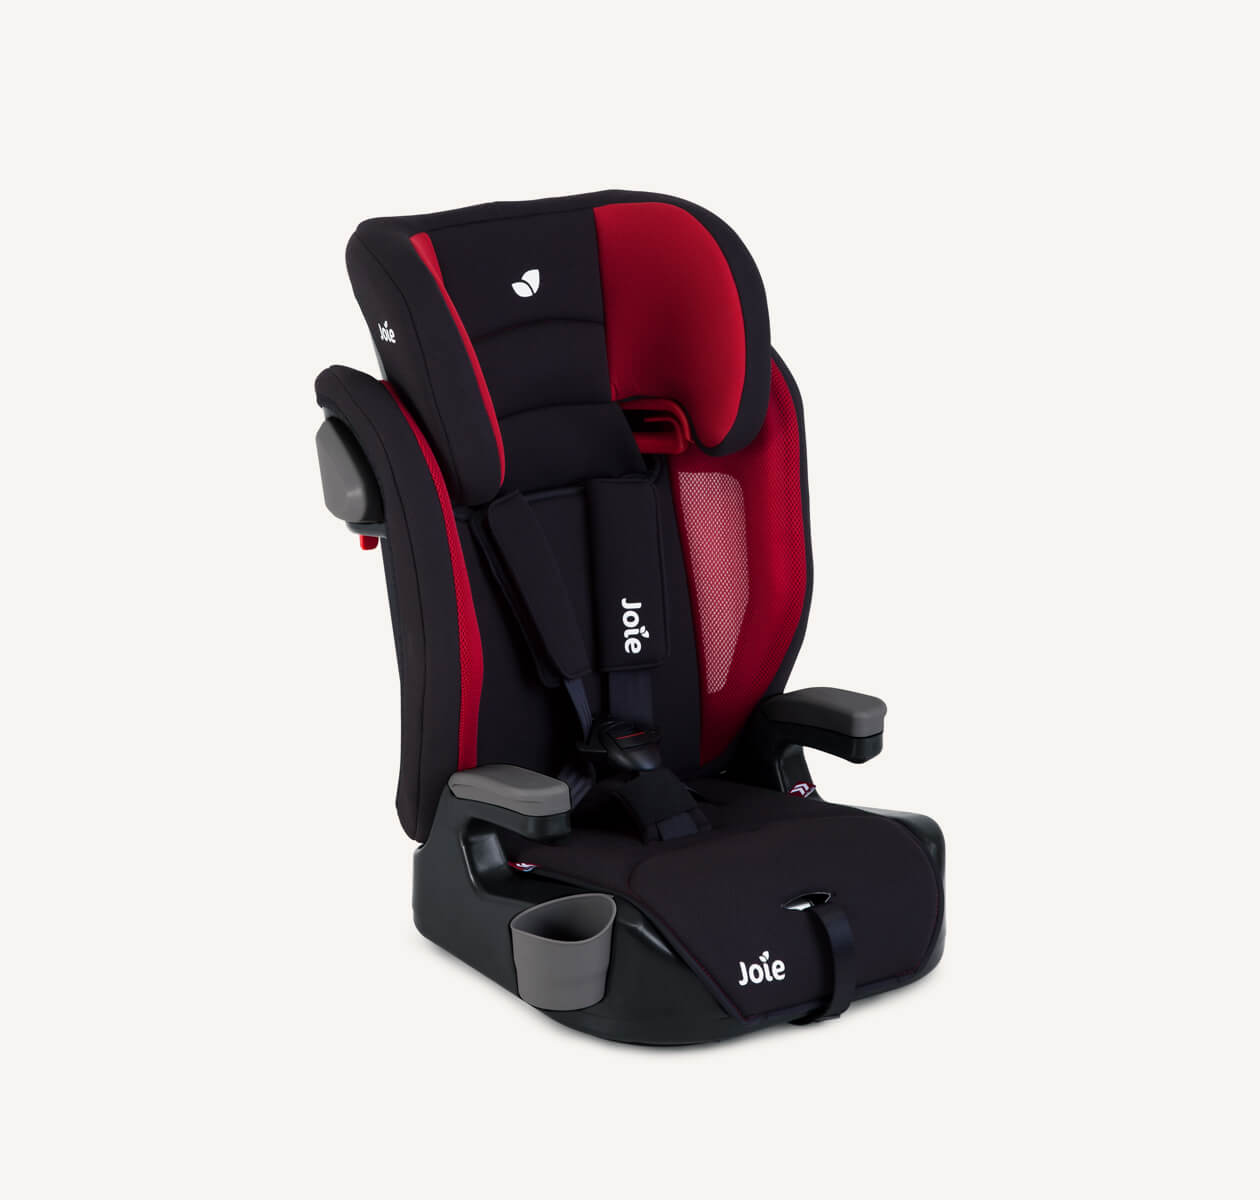 Joie Elevate booster car seat with 5-point harness in a two tone gray colour, at an angle facing to the right.